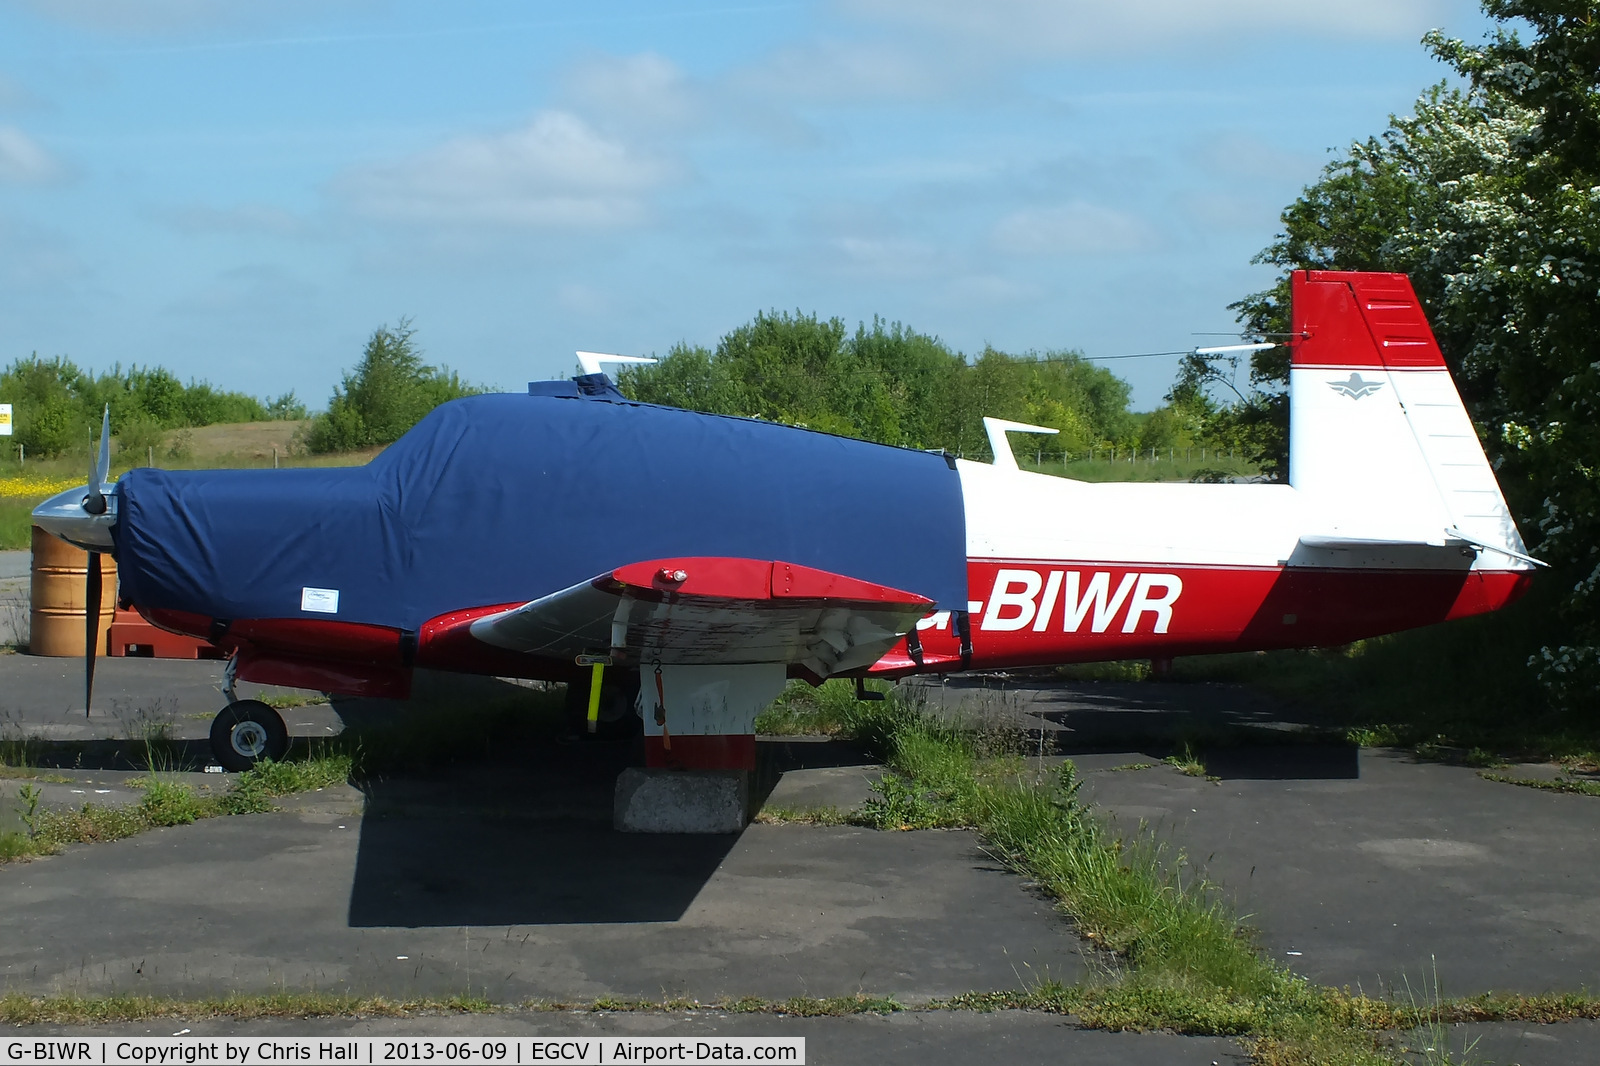 G-BIWR, 1976 Mooney M20F Executive C/N 22-1339, former Liverpool resident, now based at Sleap